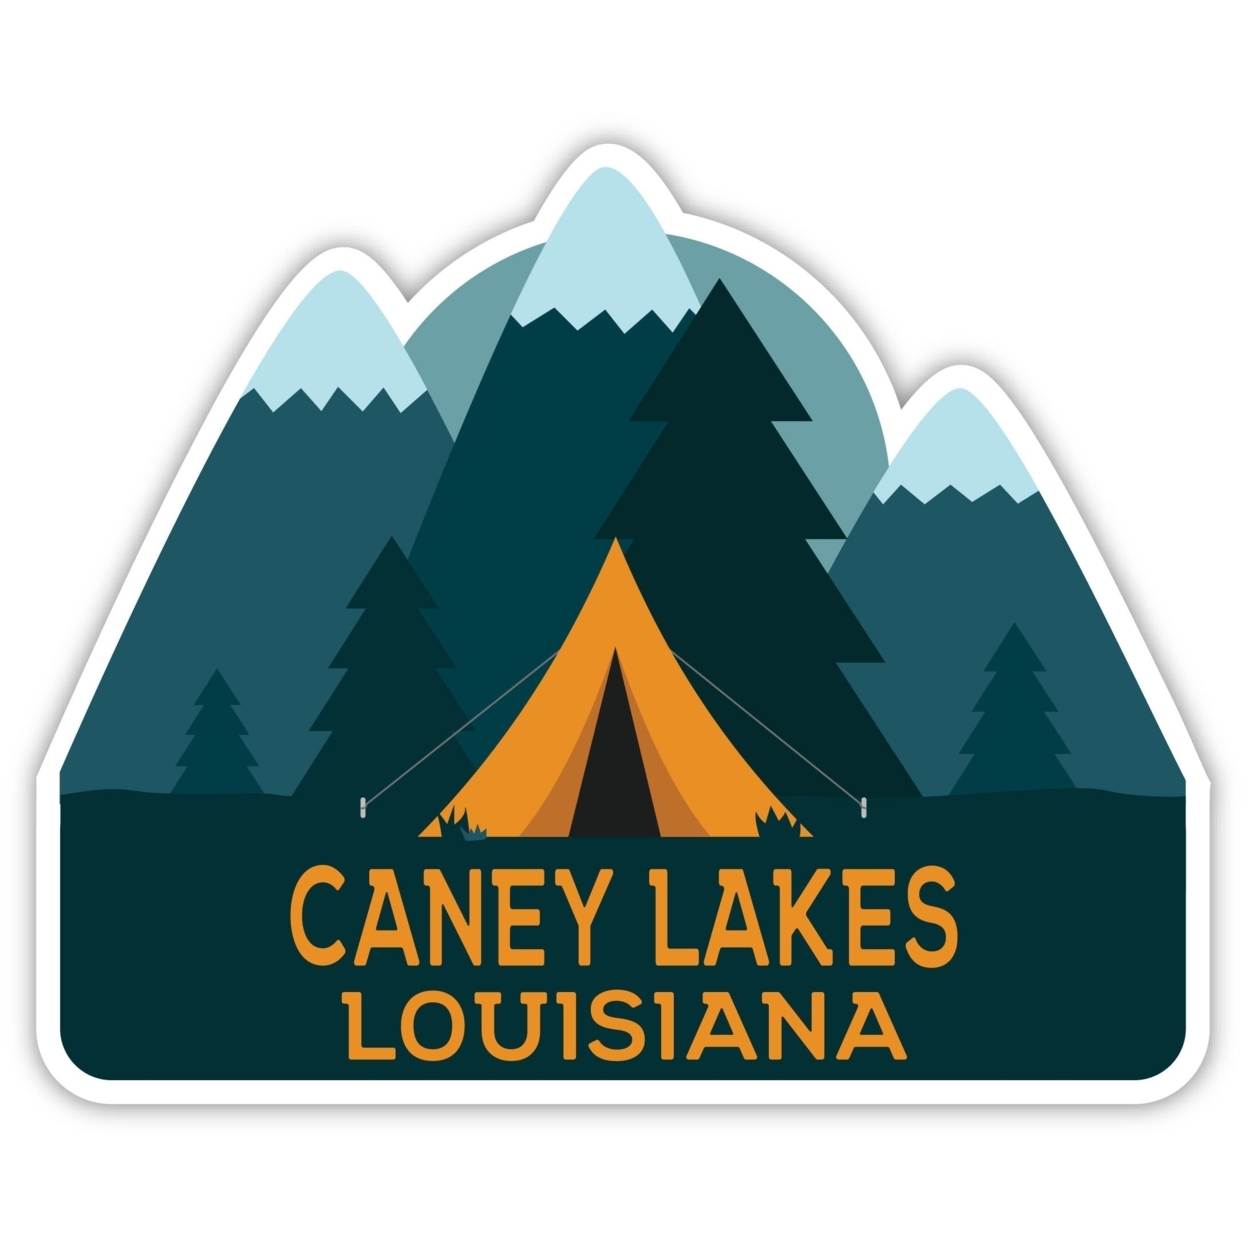 Caney Lakes Louisiana Souvenir Decorative Stickers (Choose Theme And Size) - 4-Pack, 2-Inch, Tent